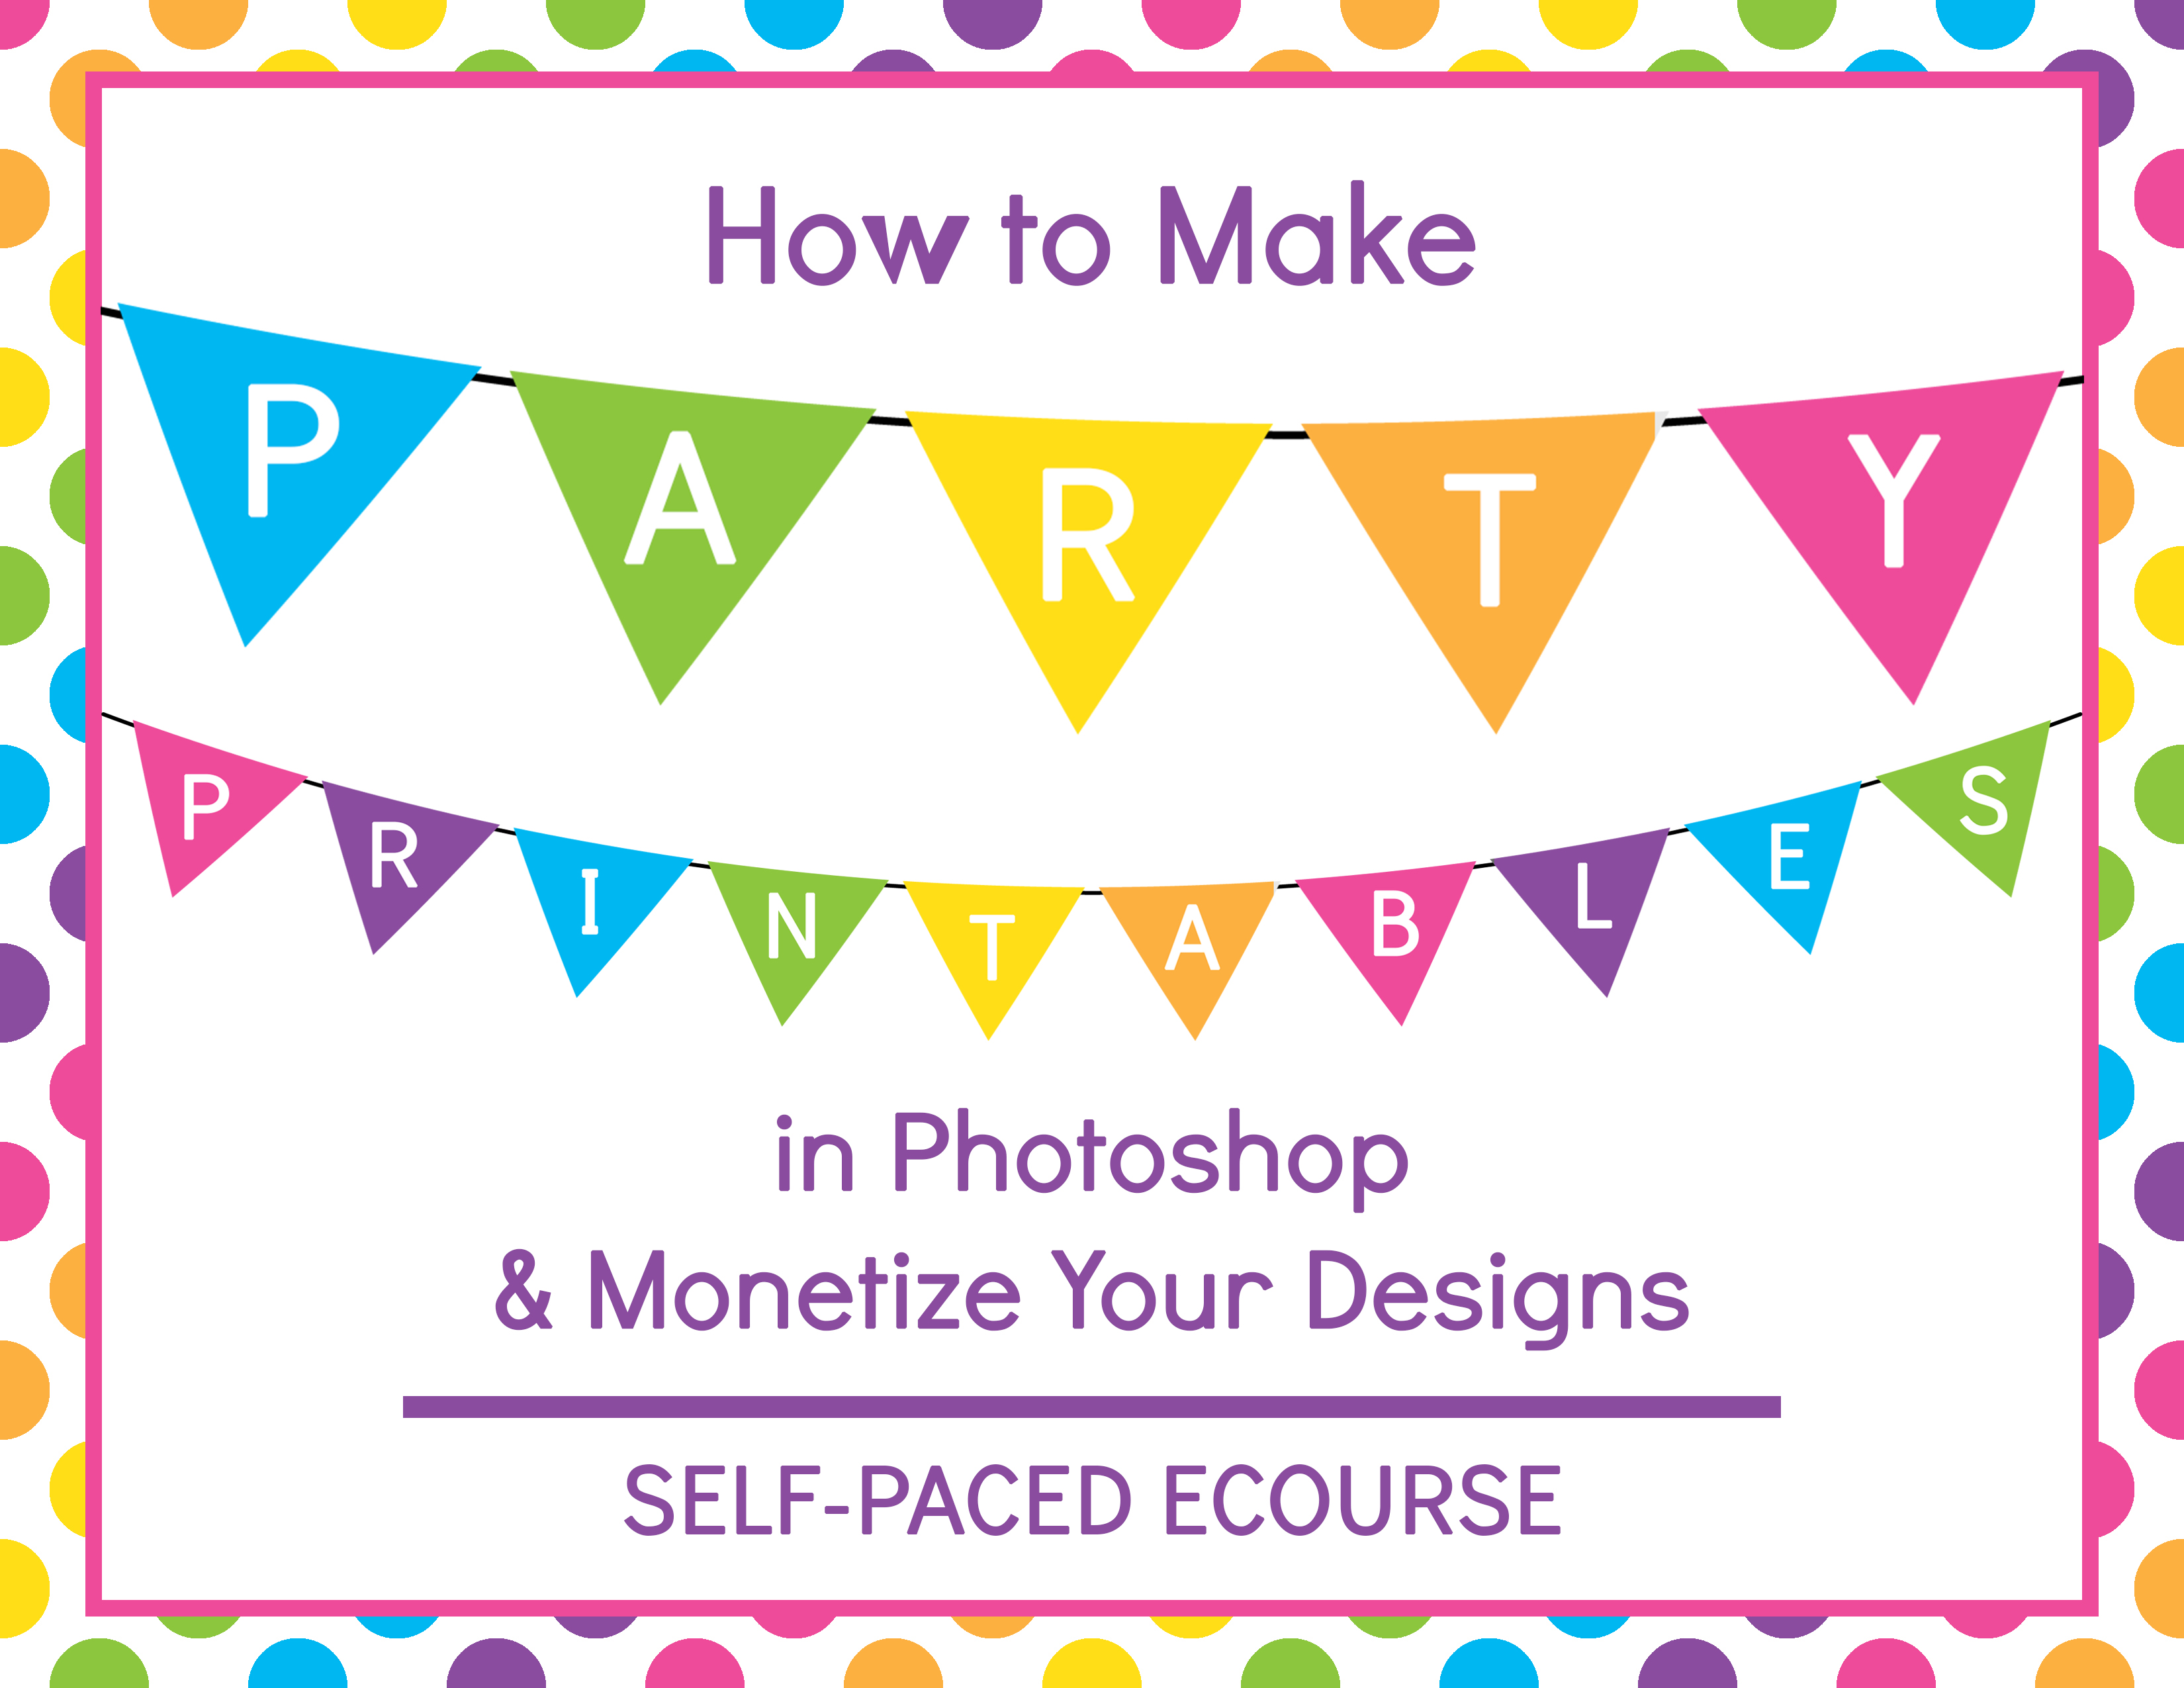 How to Make Party Printables in Photoshop and Monetize Your Designs (Ecourse)